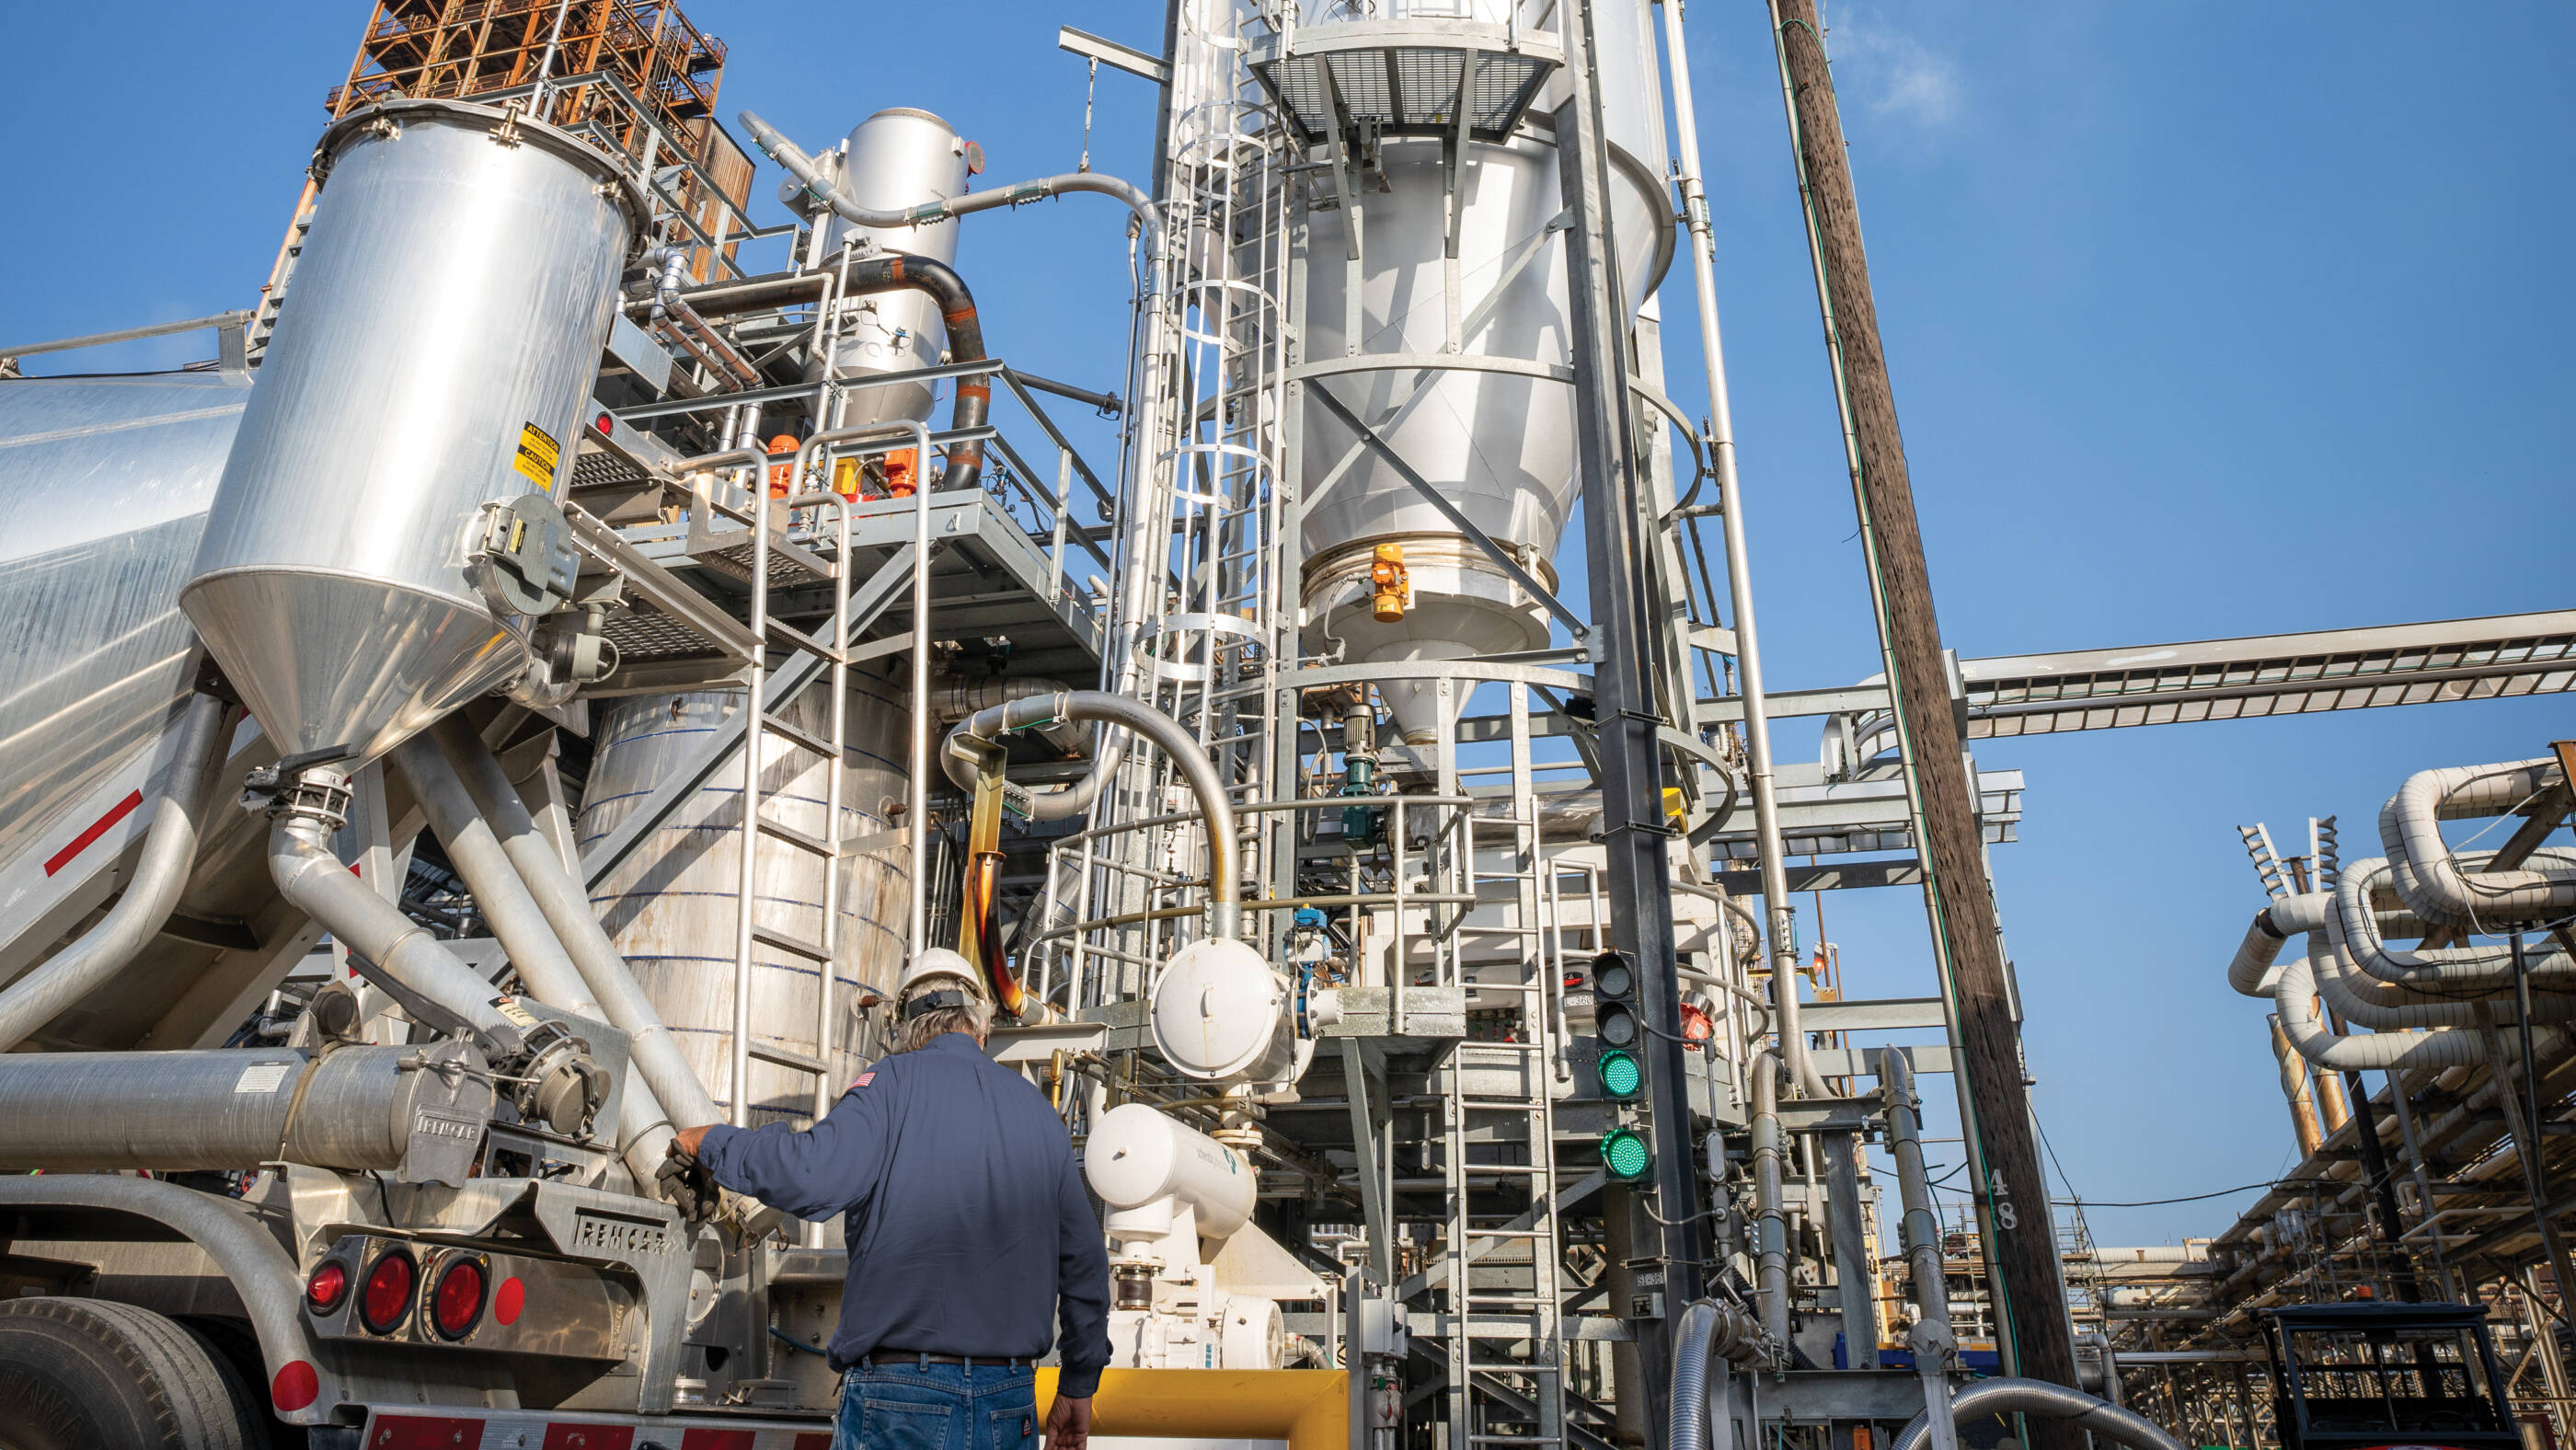 Our advanced recycling facility in Baytown, Texas, completed its first year of commercial operations, processing more than 45 million pounds of plastic waste since startup  on our way to building 1 billion pounds of annual capacity worldwide by year-end 2026. We also started selling certified-circular polymers via mass balance attribution for use in food-safe packaging.